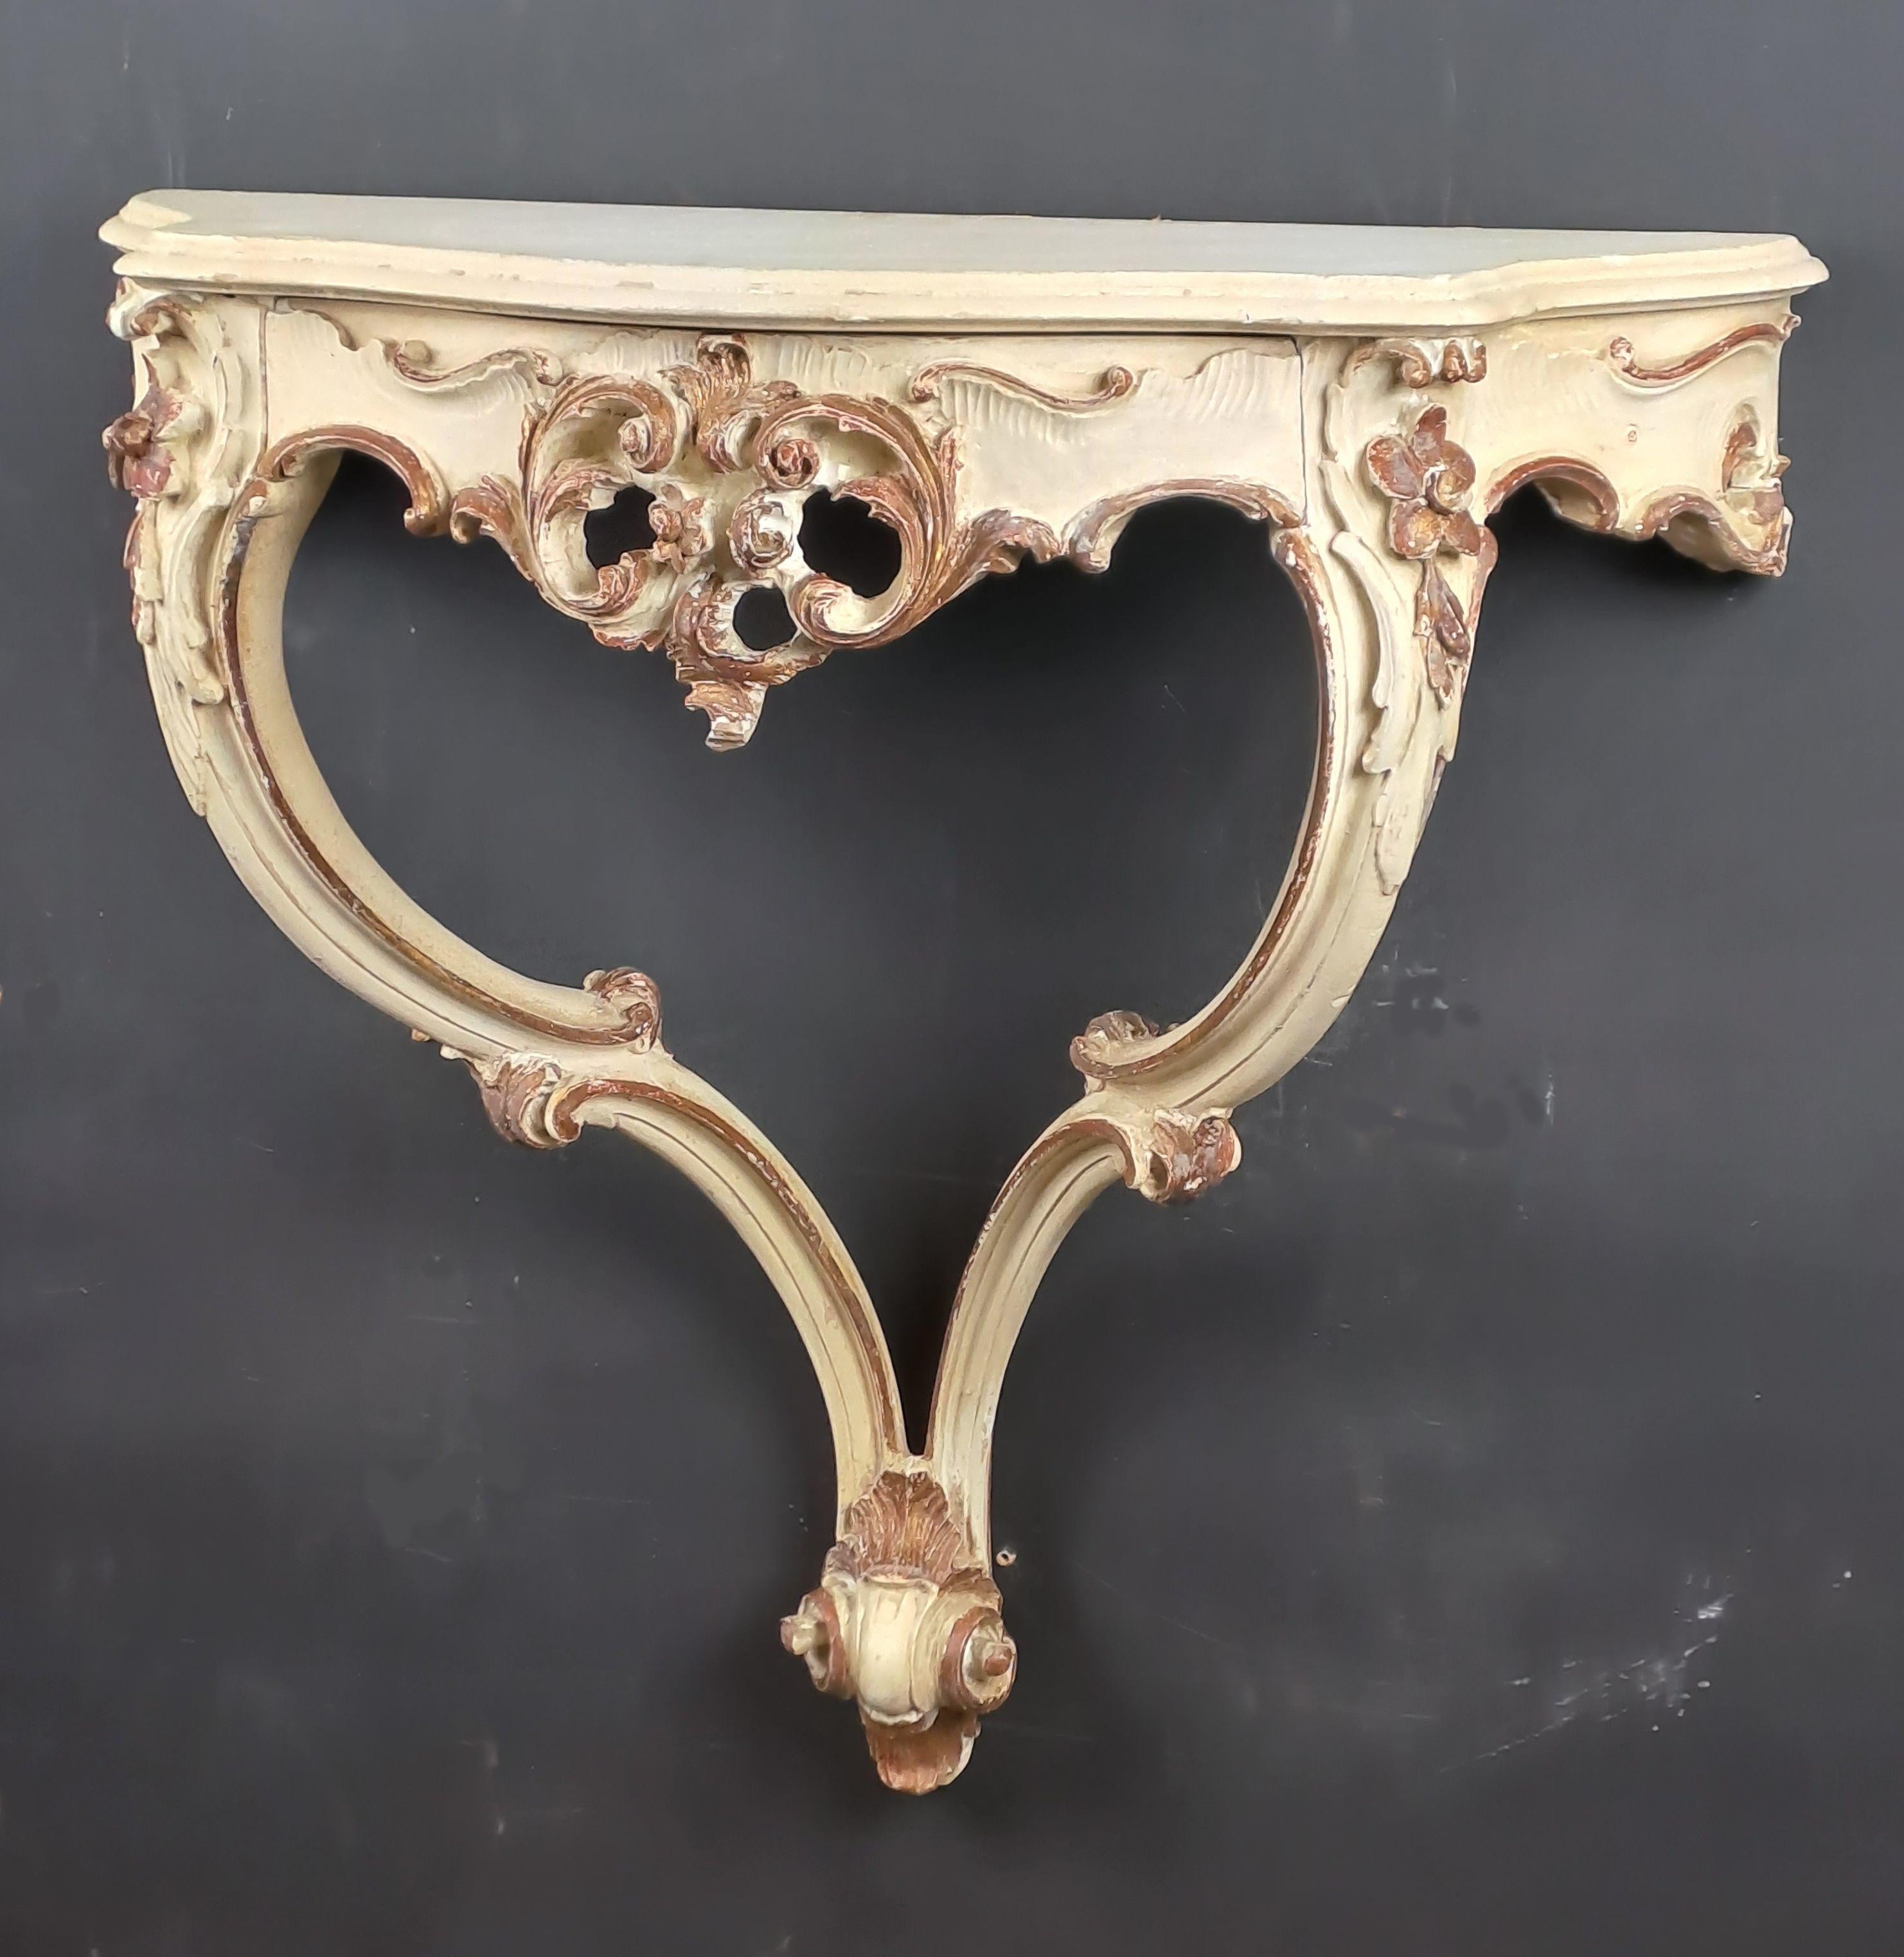 Rococo Revival Rocaille Console In Lacquered And Gilded Wood